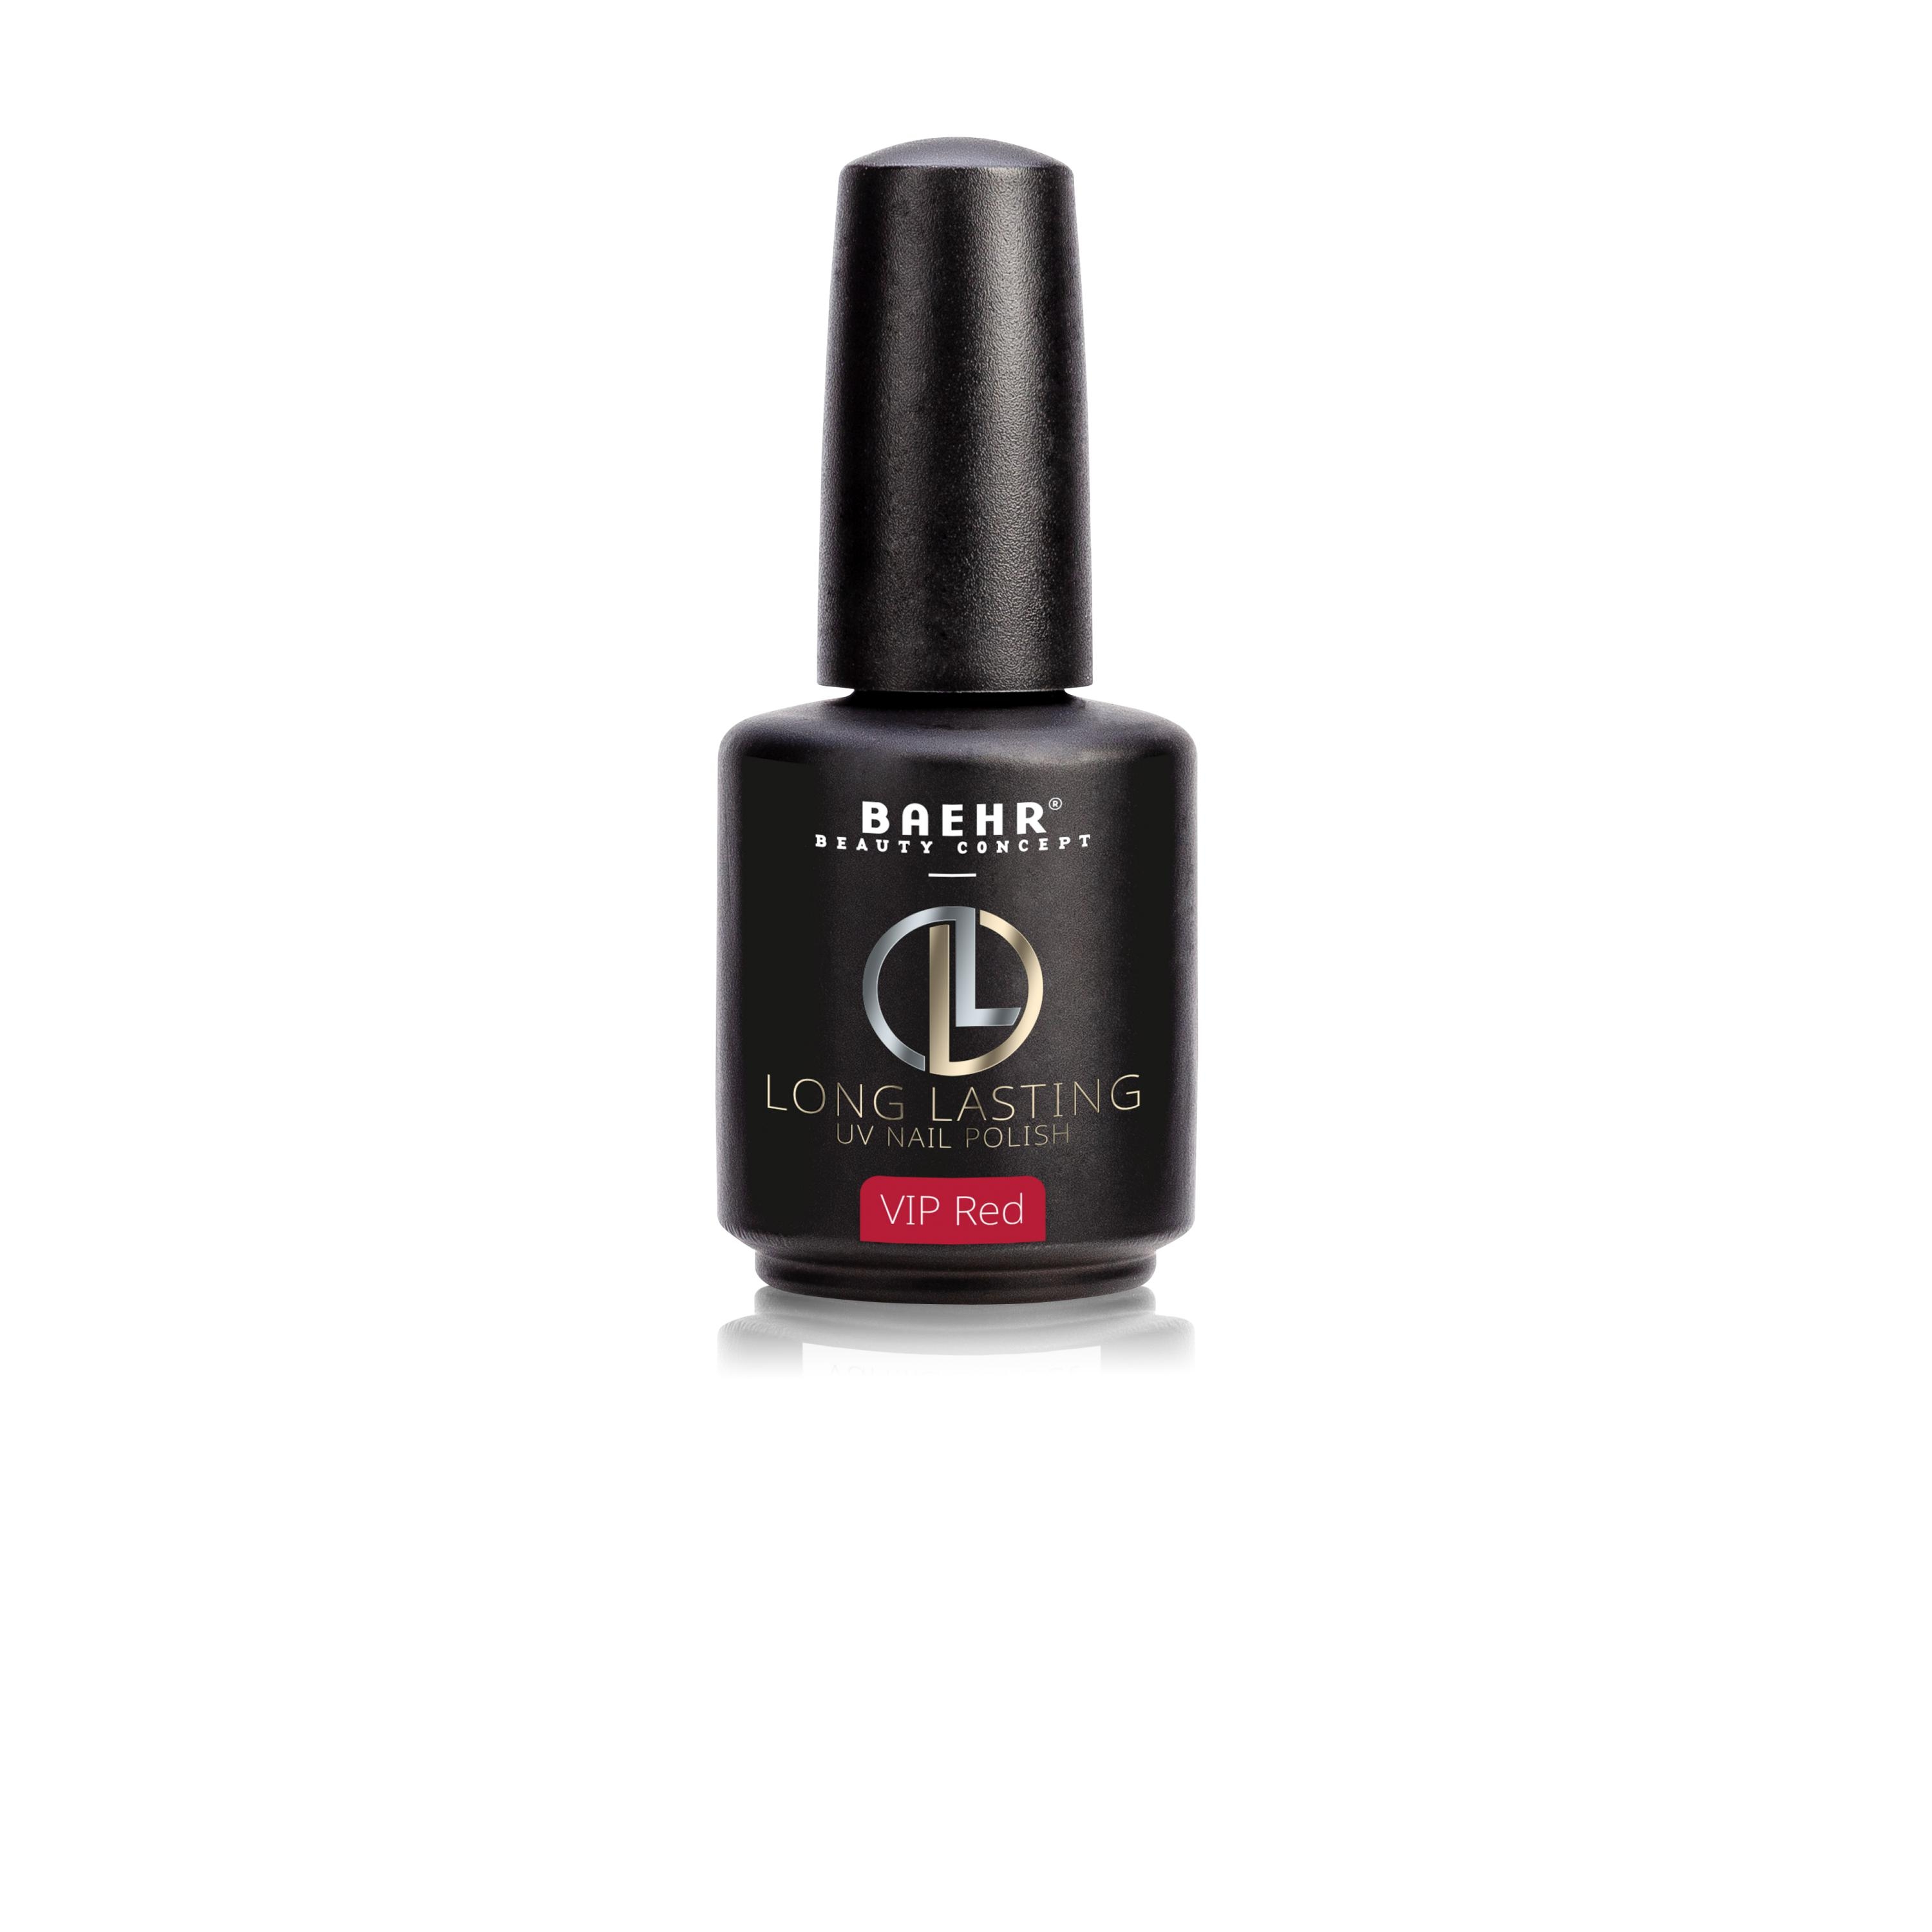 BAEHR BEAUTY CONCEPT - NAILS Long-Lasting VIP Red 12 ml